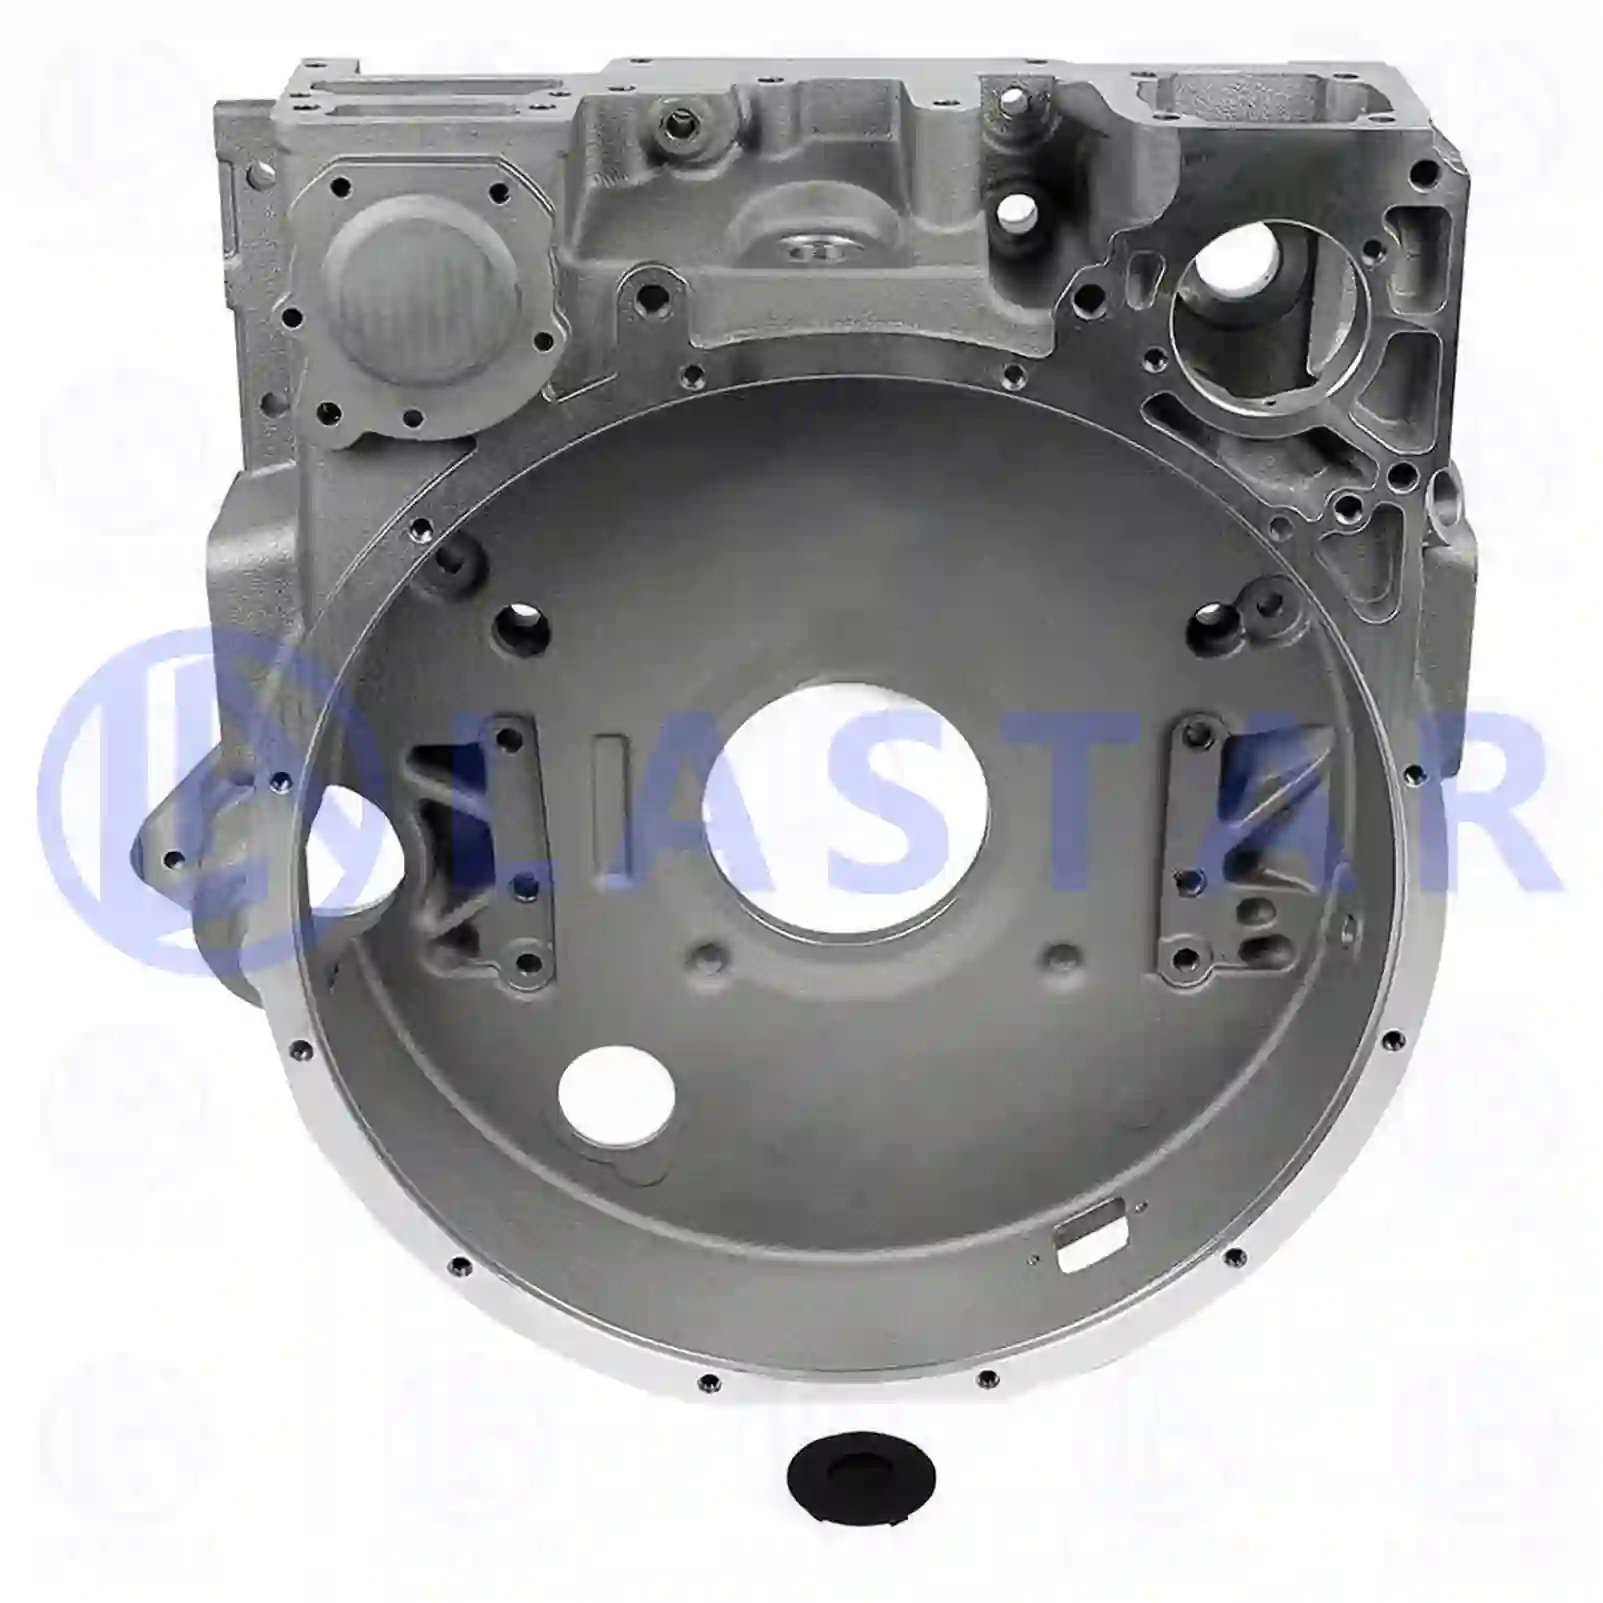 Timing case, 77702077, 5410101833, 5410101933, 5410102533, 5410103033 ||  77702077 Lastar Spare Part | Truck Spare Parts, Auotomotive Spare Parts Timing case, 77702077, 5410101833, 5410101933, 5410102533, 5410103033 ||  77702077 Lastar Spare Part | Truck Spare Parts, Auotomotive Spare Parts